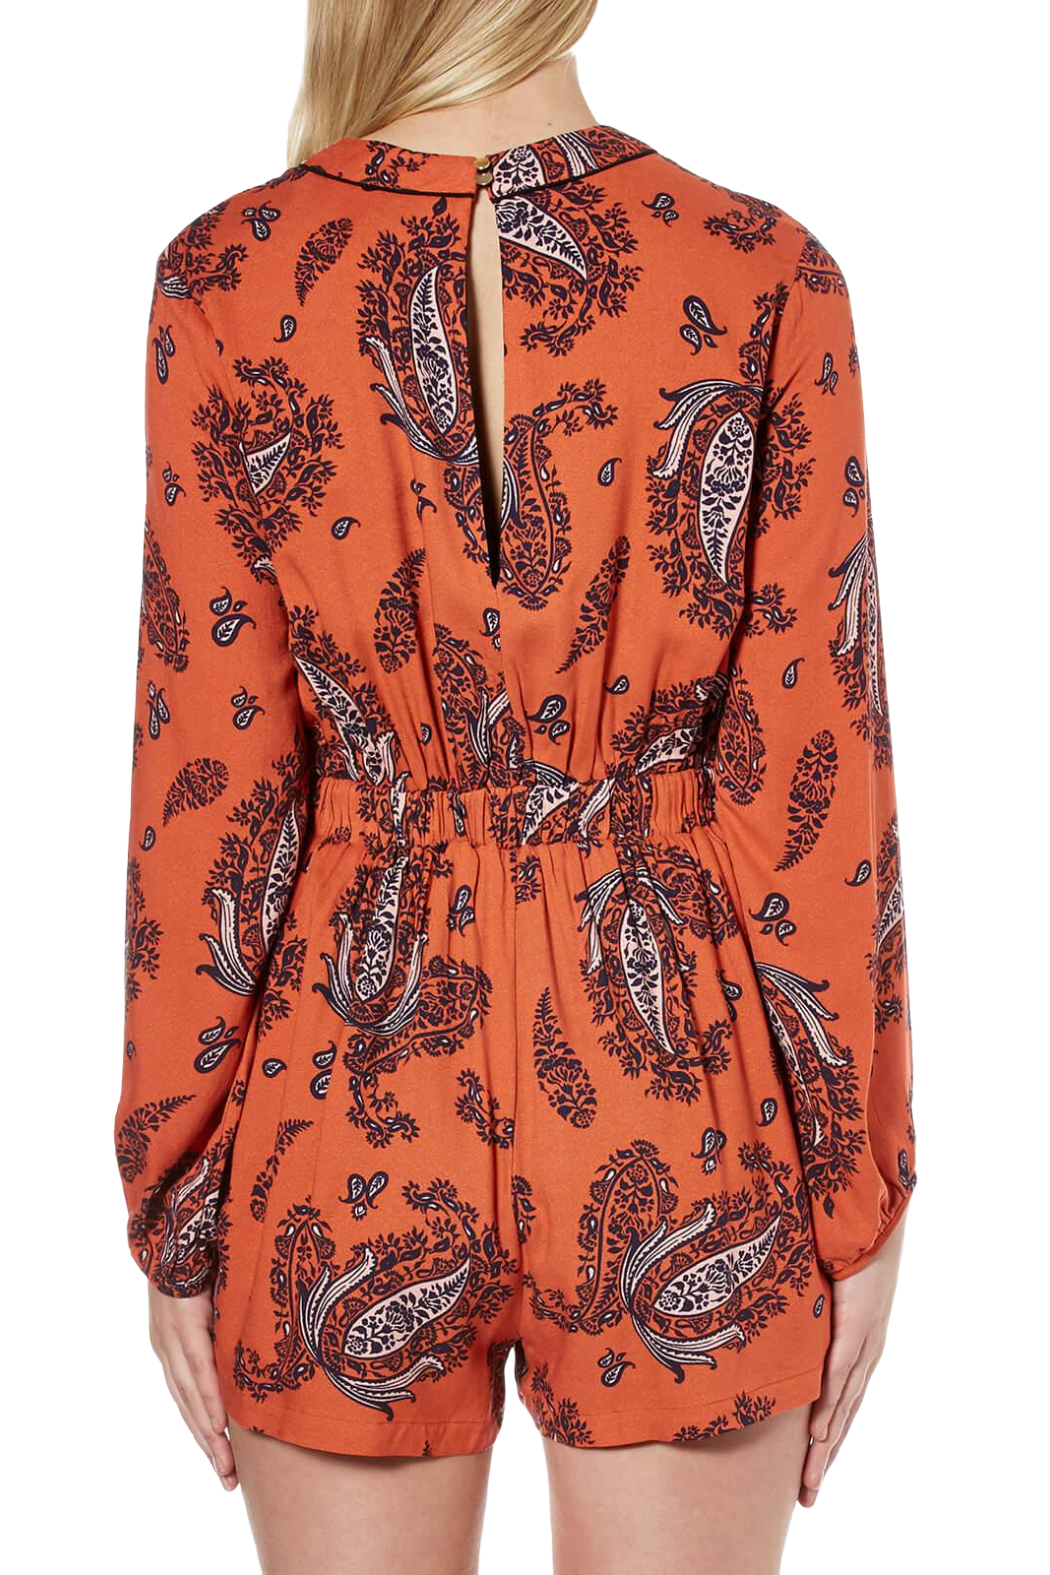 Spice of Life Playsuit